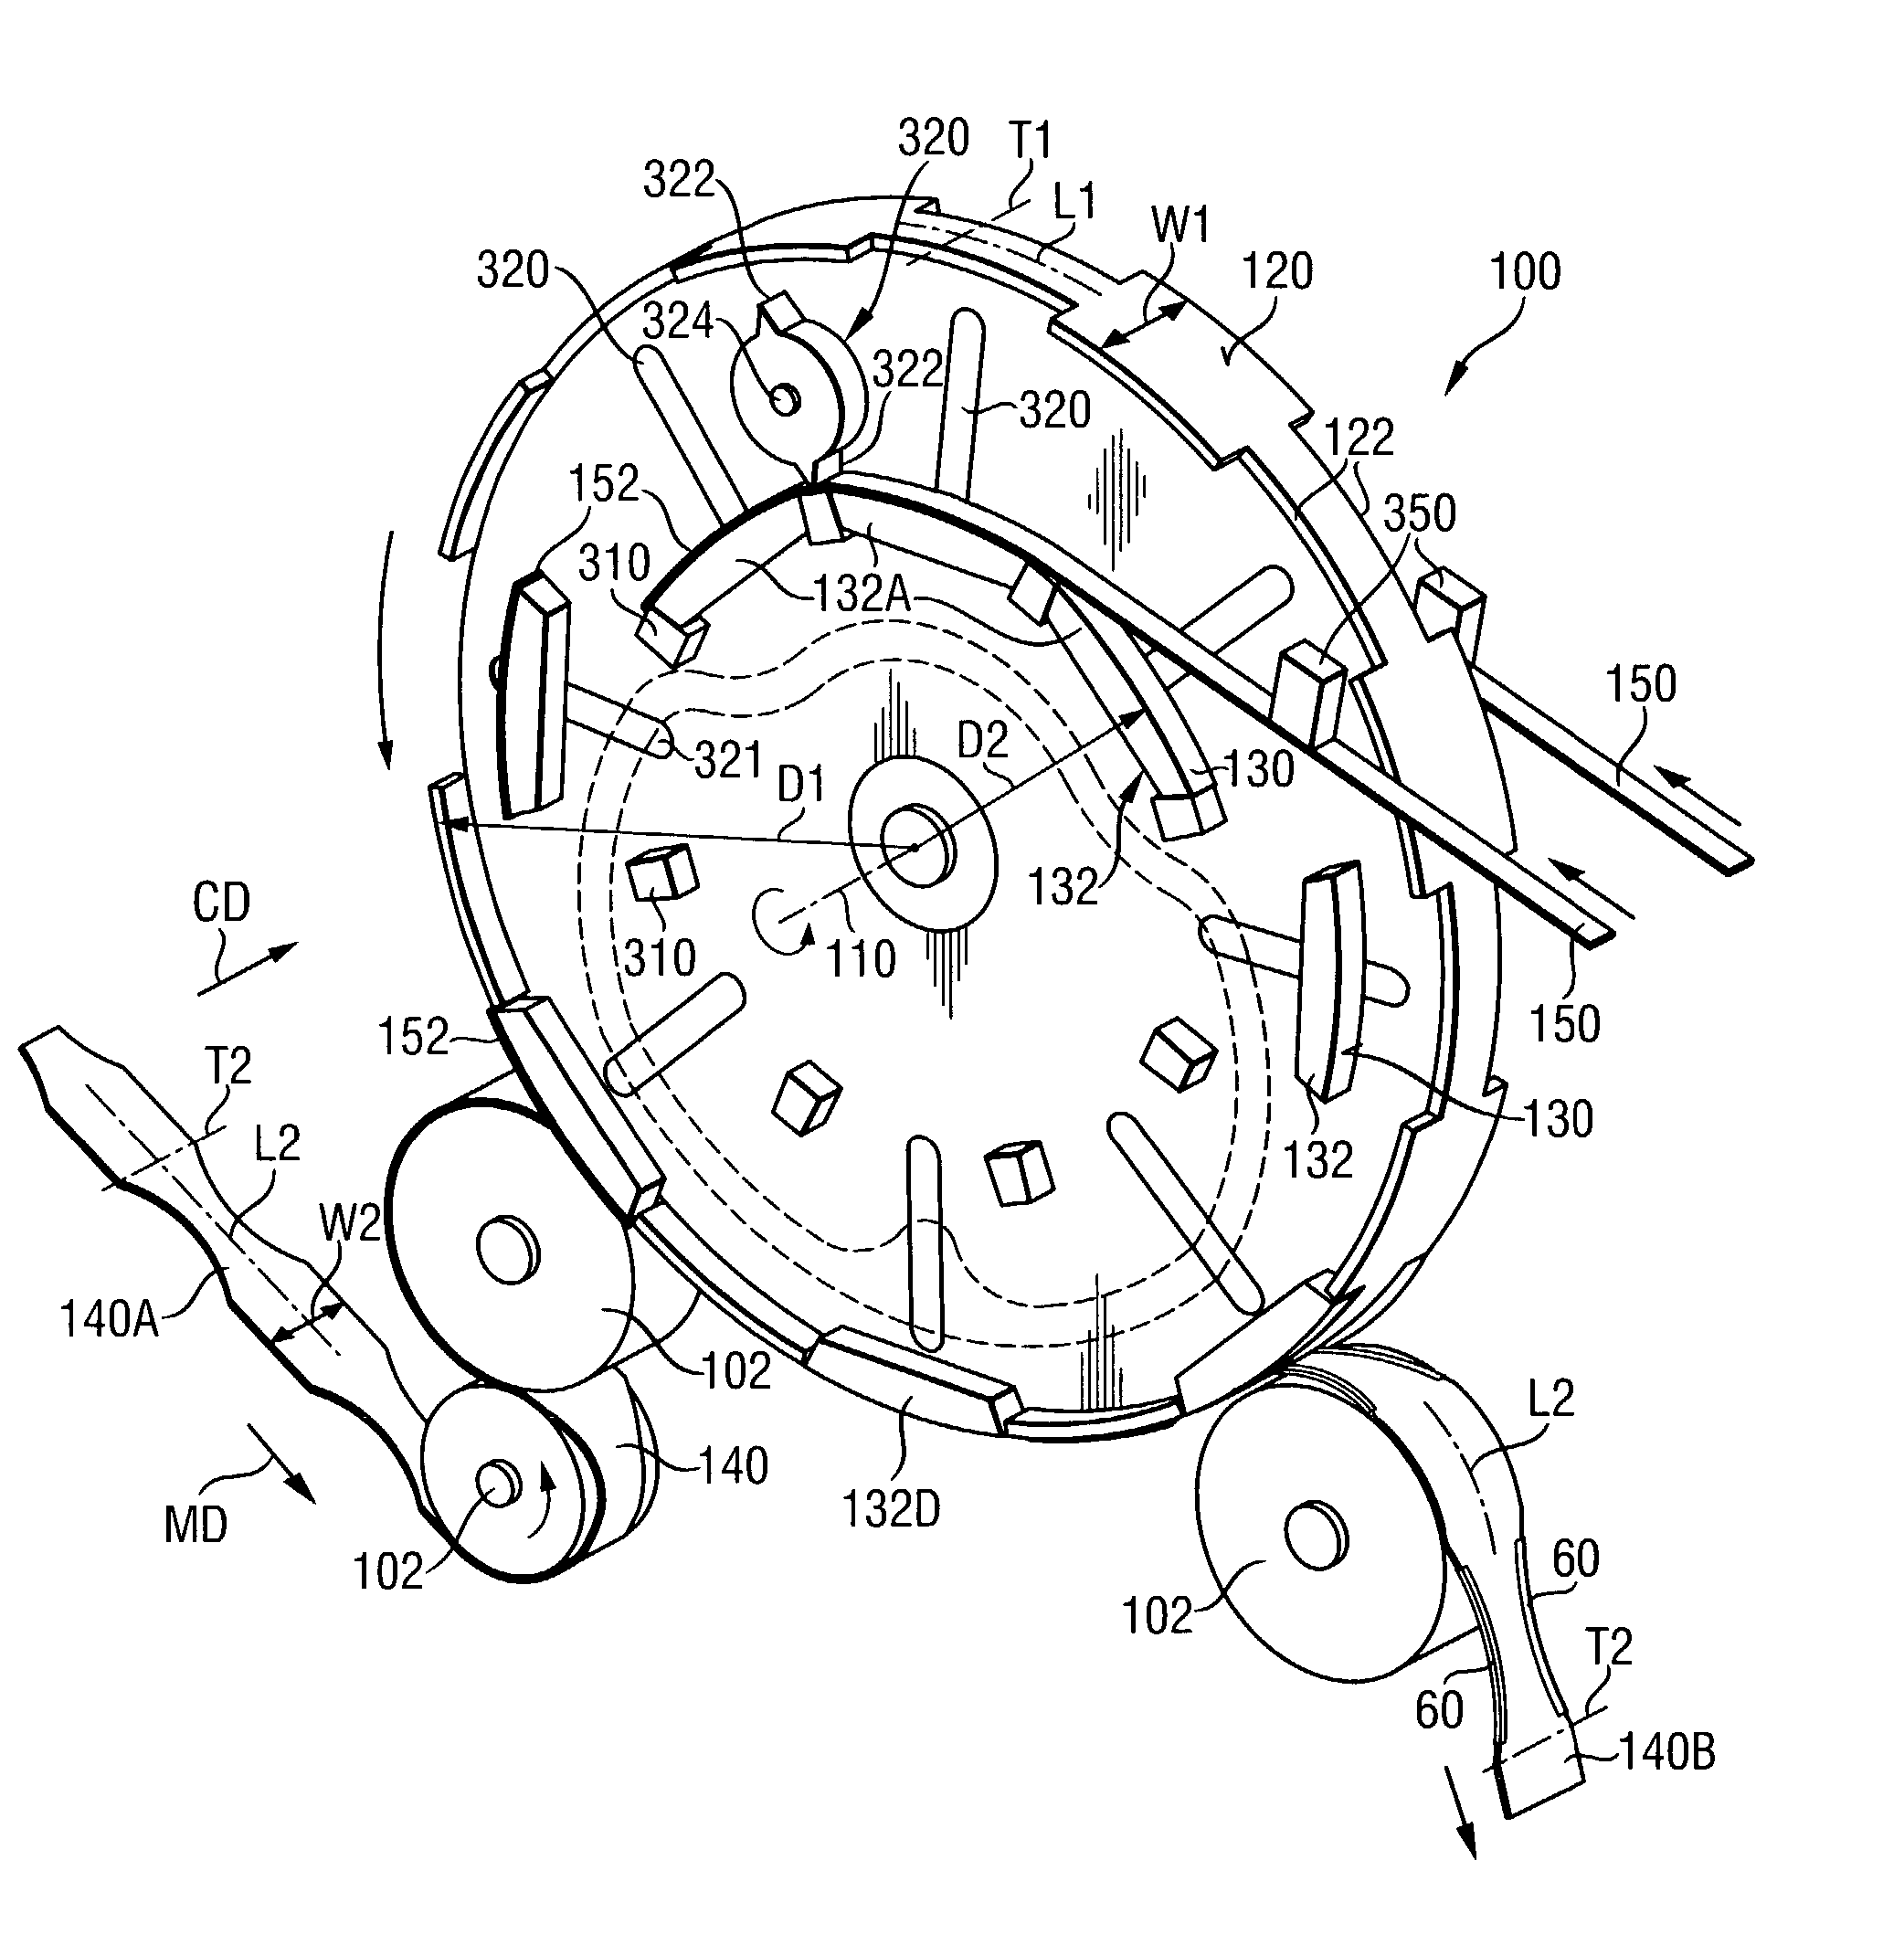 Edge seal for absorbent article and method for making